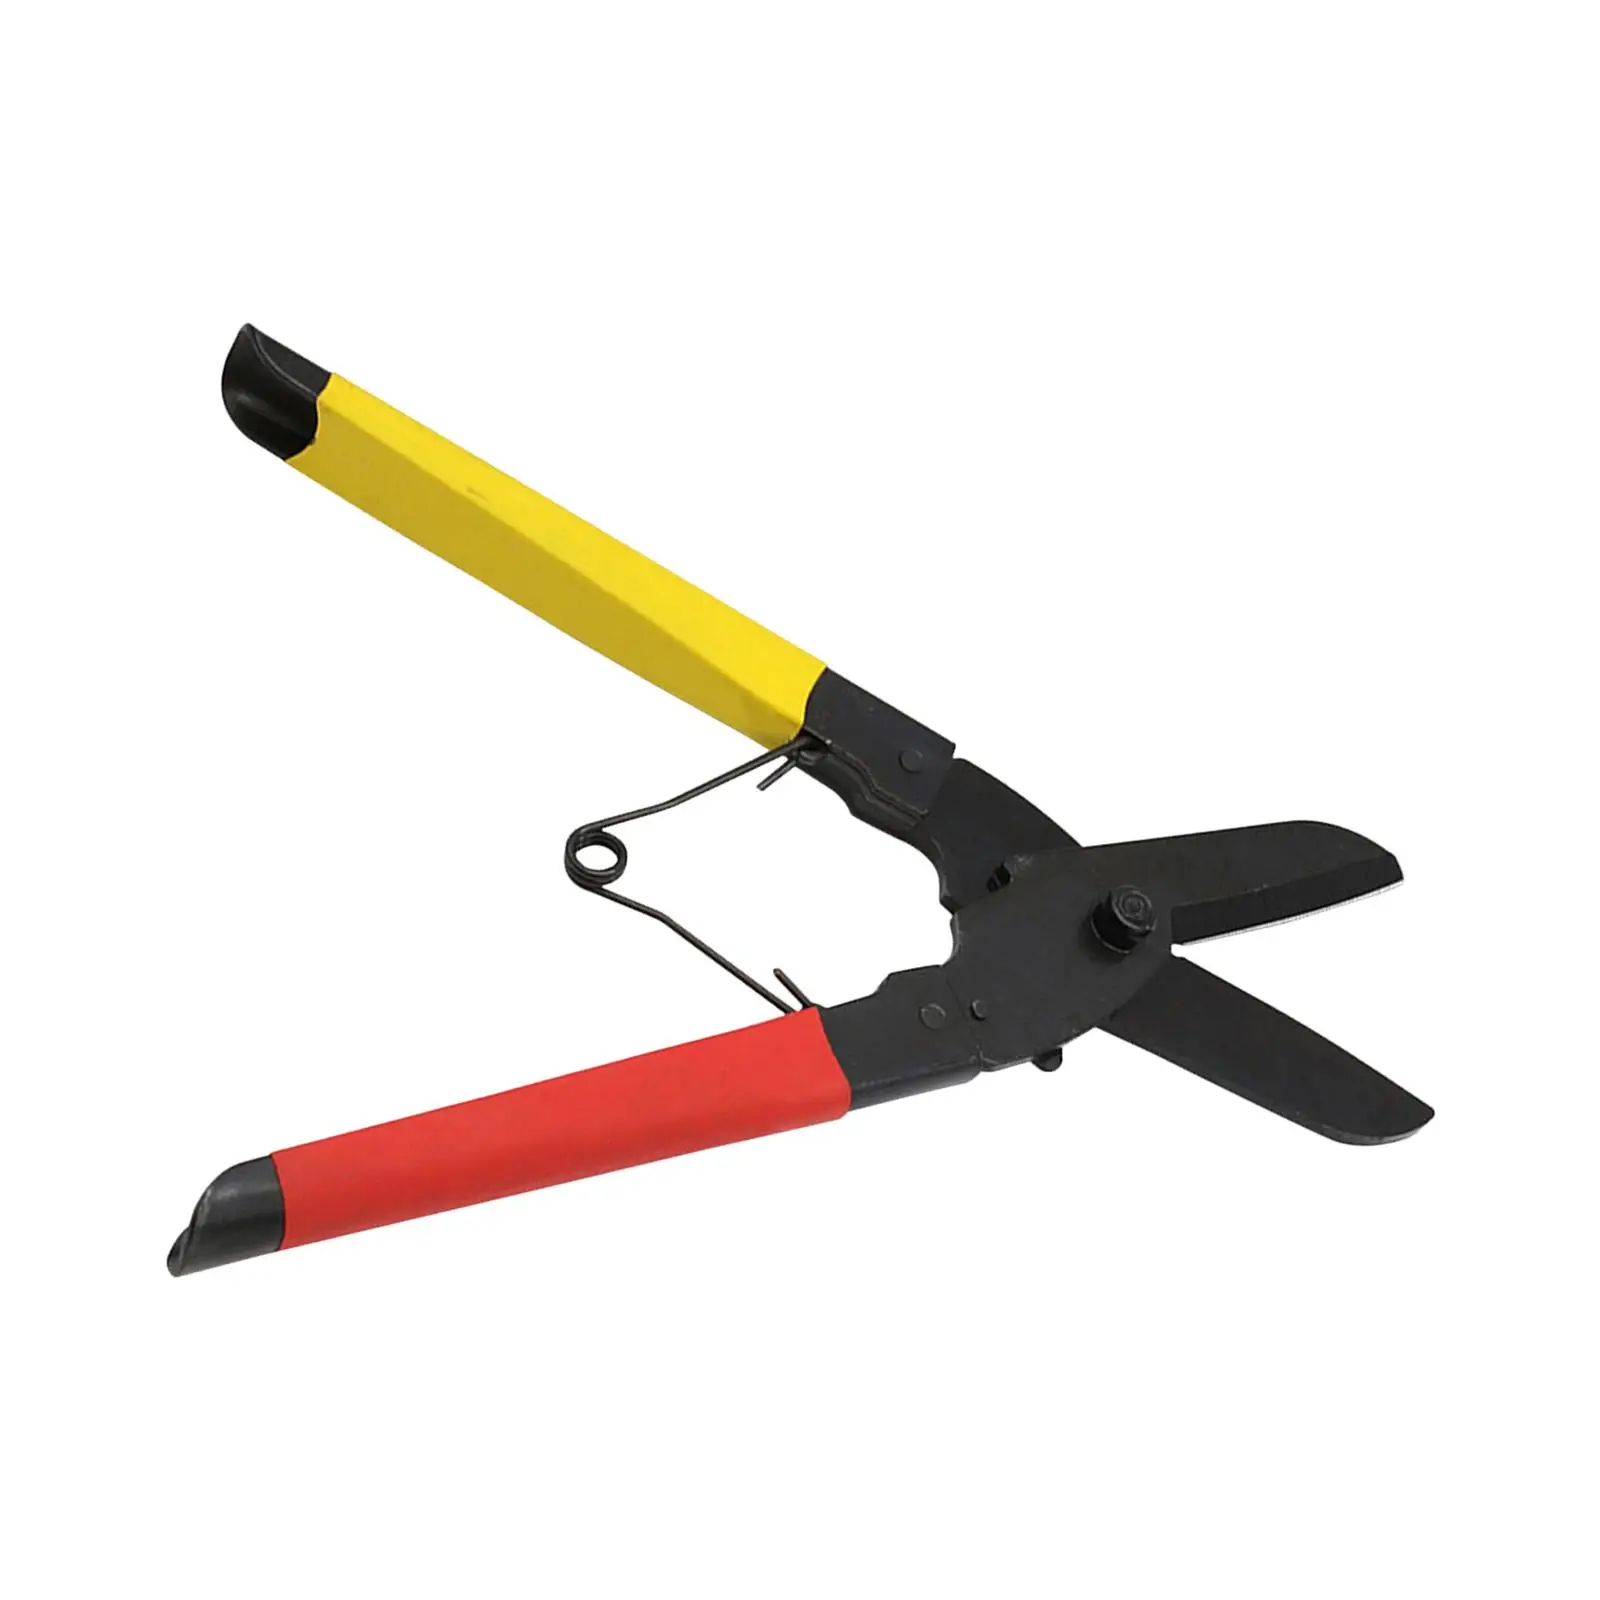 Gardening Scissors Metal Sheet Cutter Hand Tool Wire Cutter Heavy Duty Hand Shear for Plate Plumbing Cables Carpet